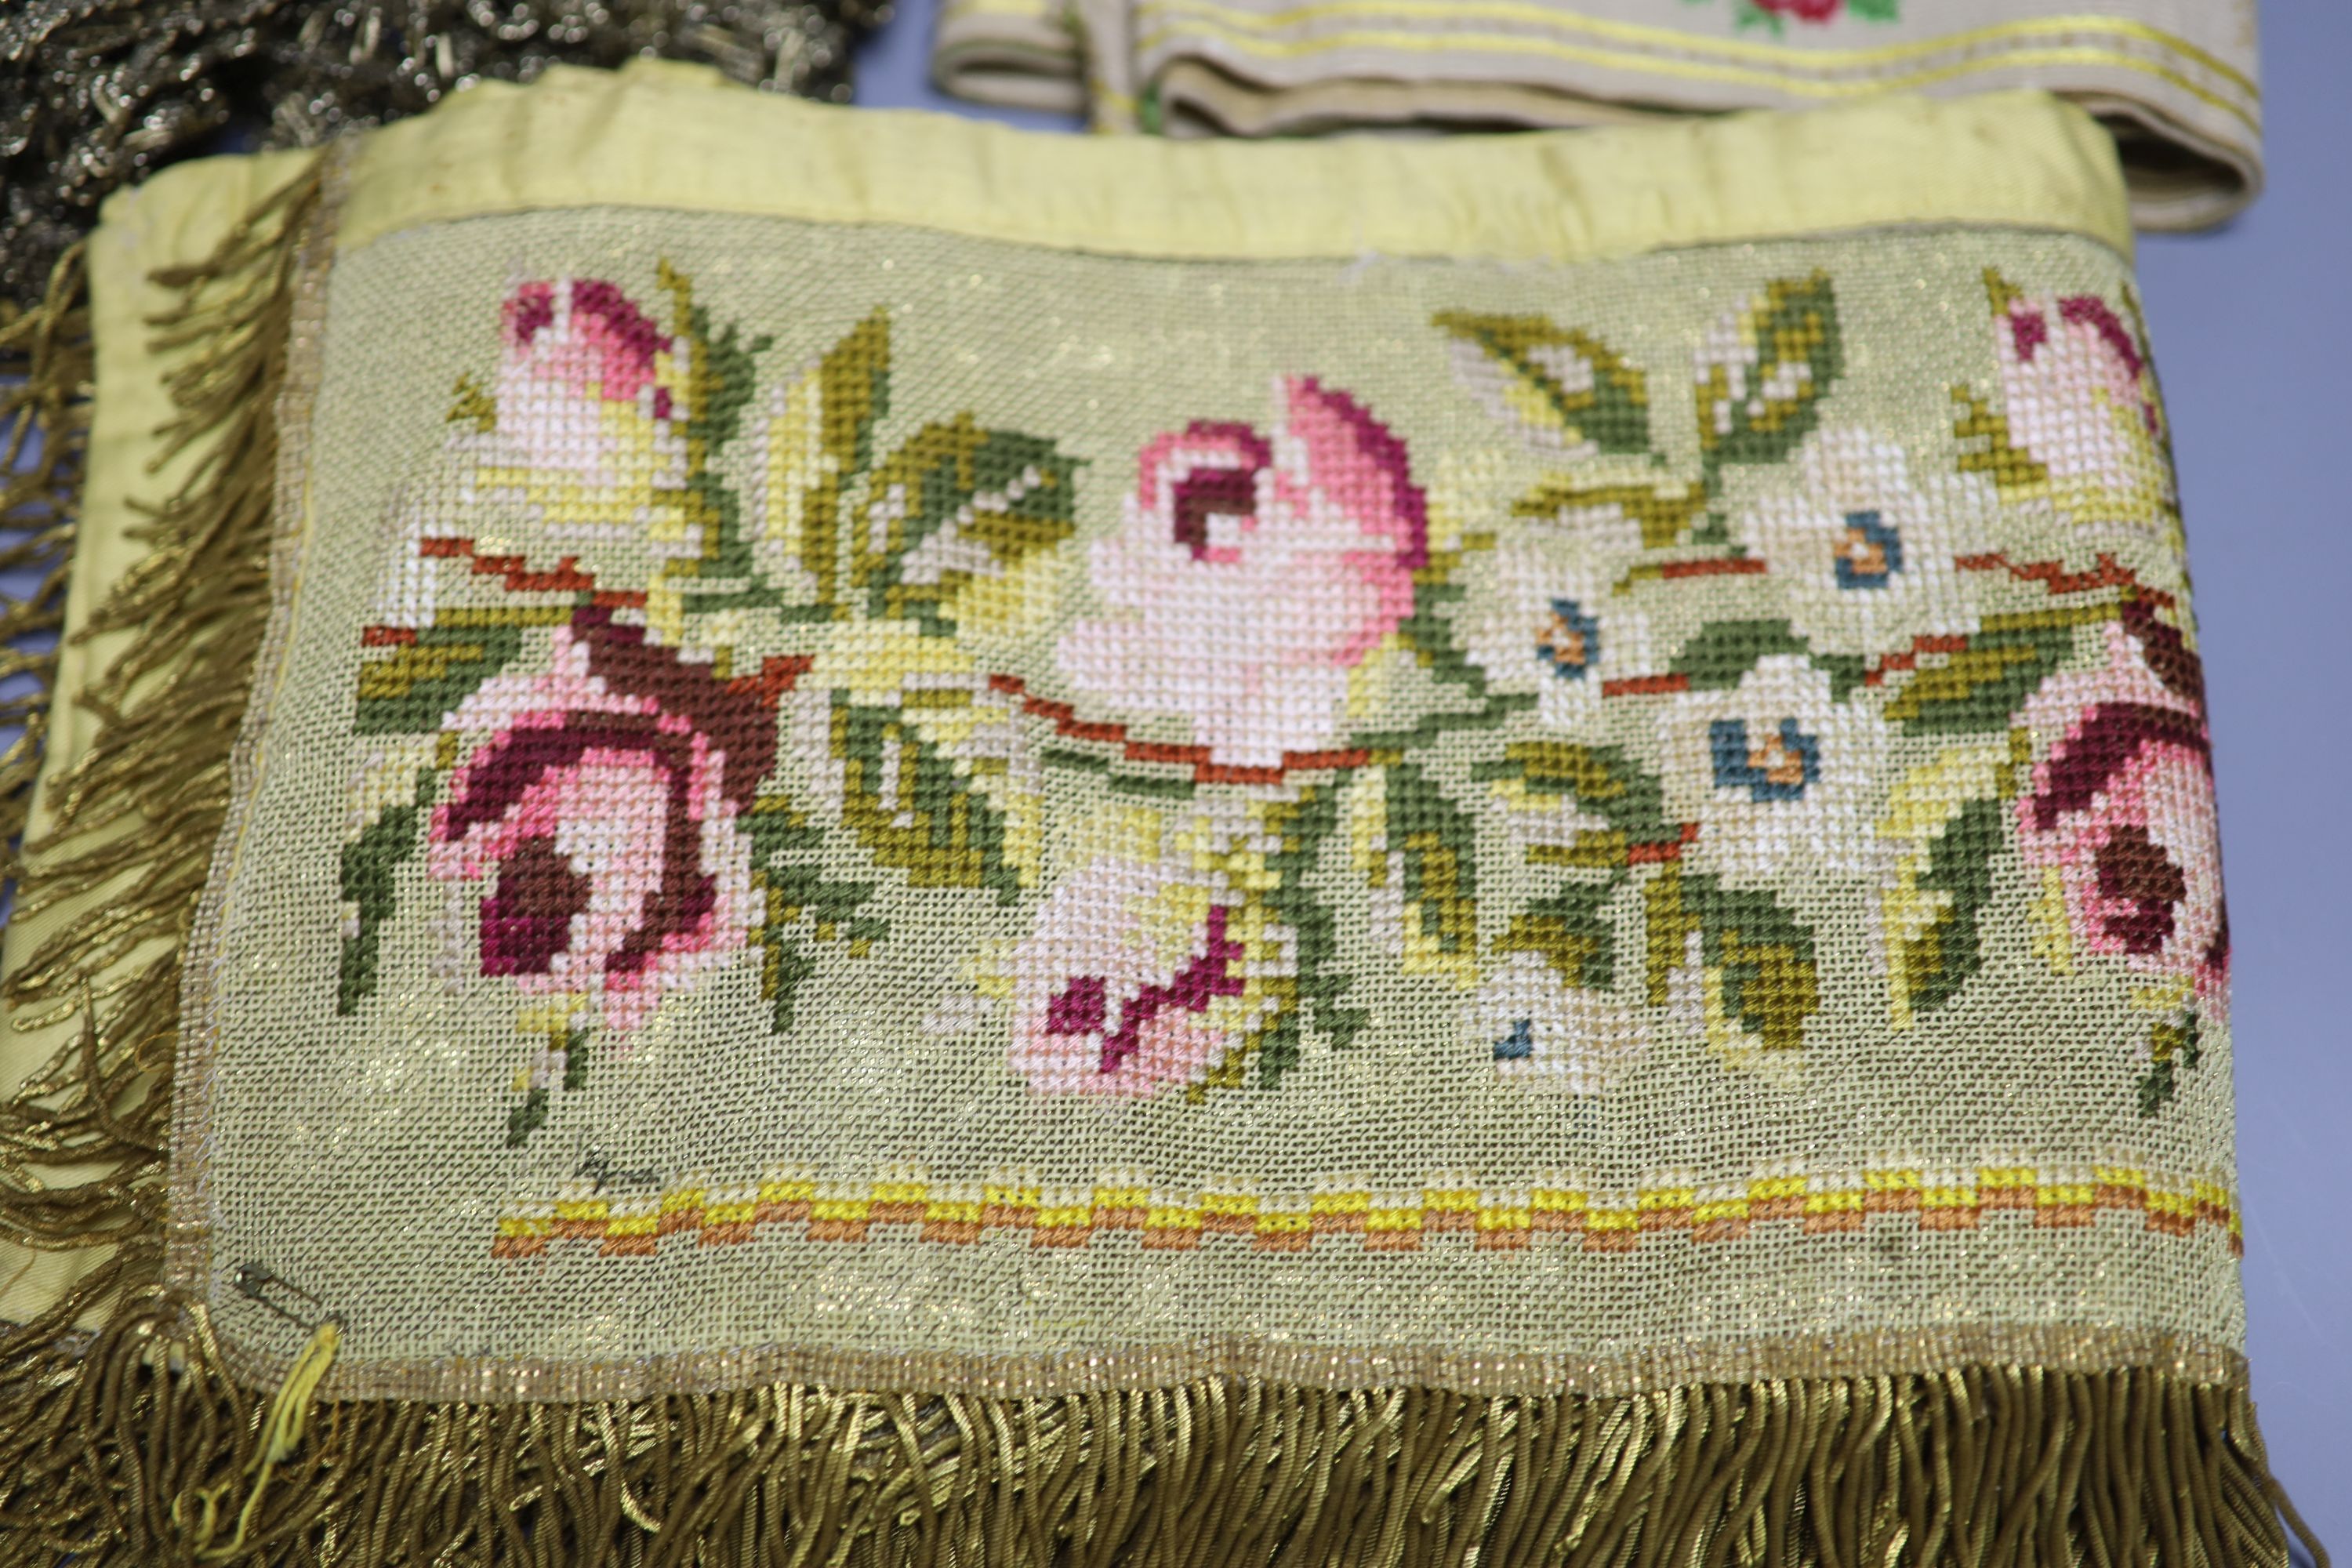 A Lurex 19th century cross stitch pelmet with gold coloured metal bullion fringing, a long French floral braid and a quantity of gold c